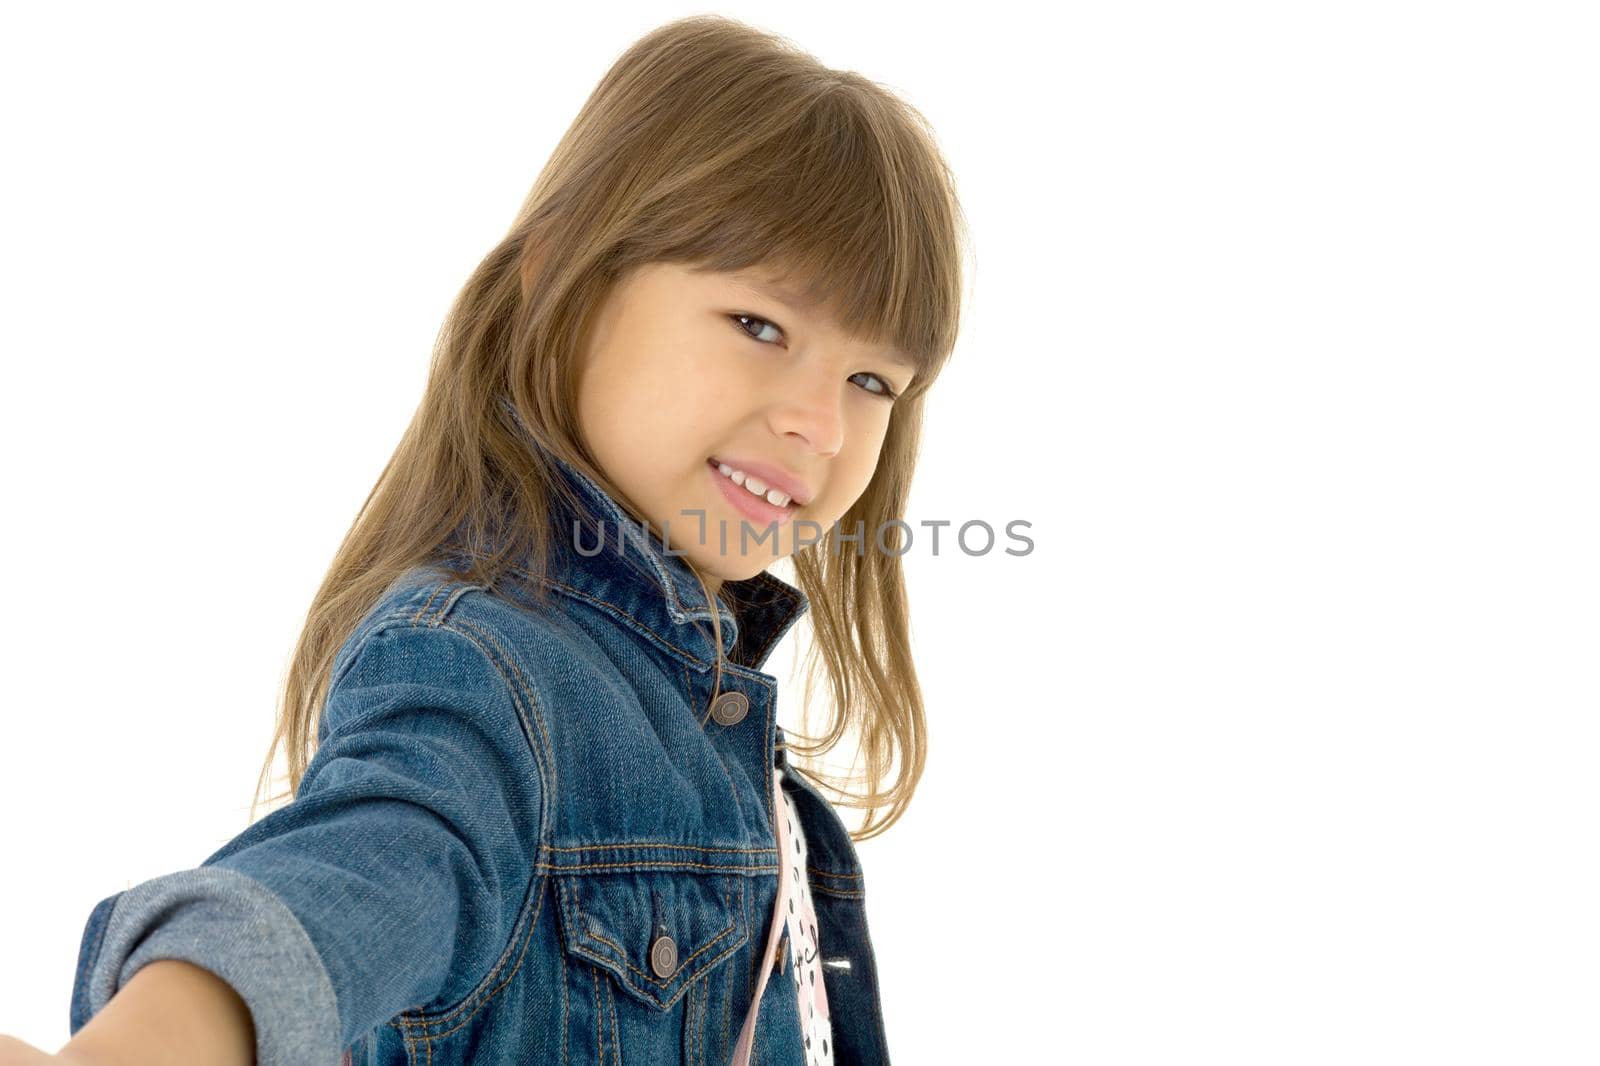 Portrait of happy girl in stylish outfit. Beautiful smiling brown eyed preteen girl wearing denim jacket posing against white background with crossbody shoulder bag